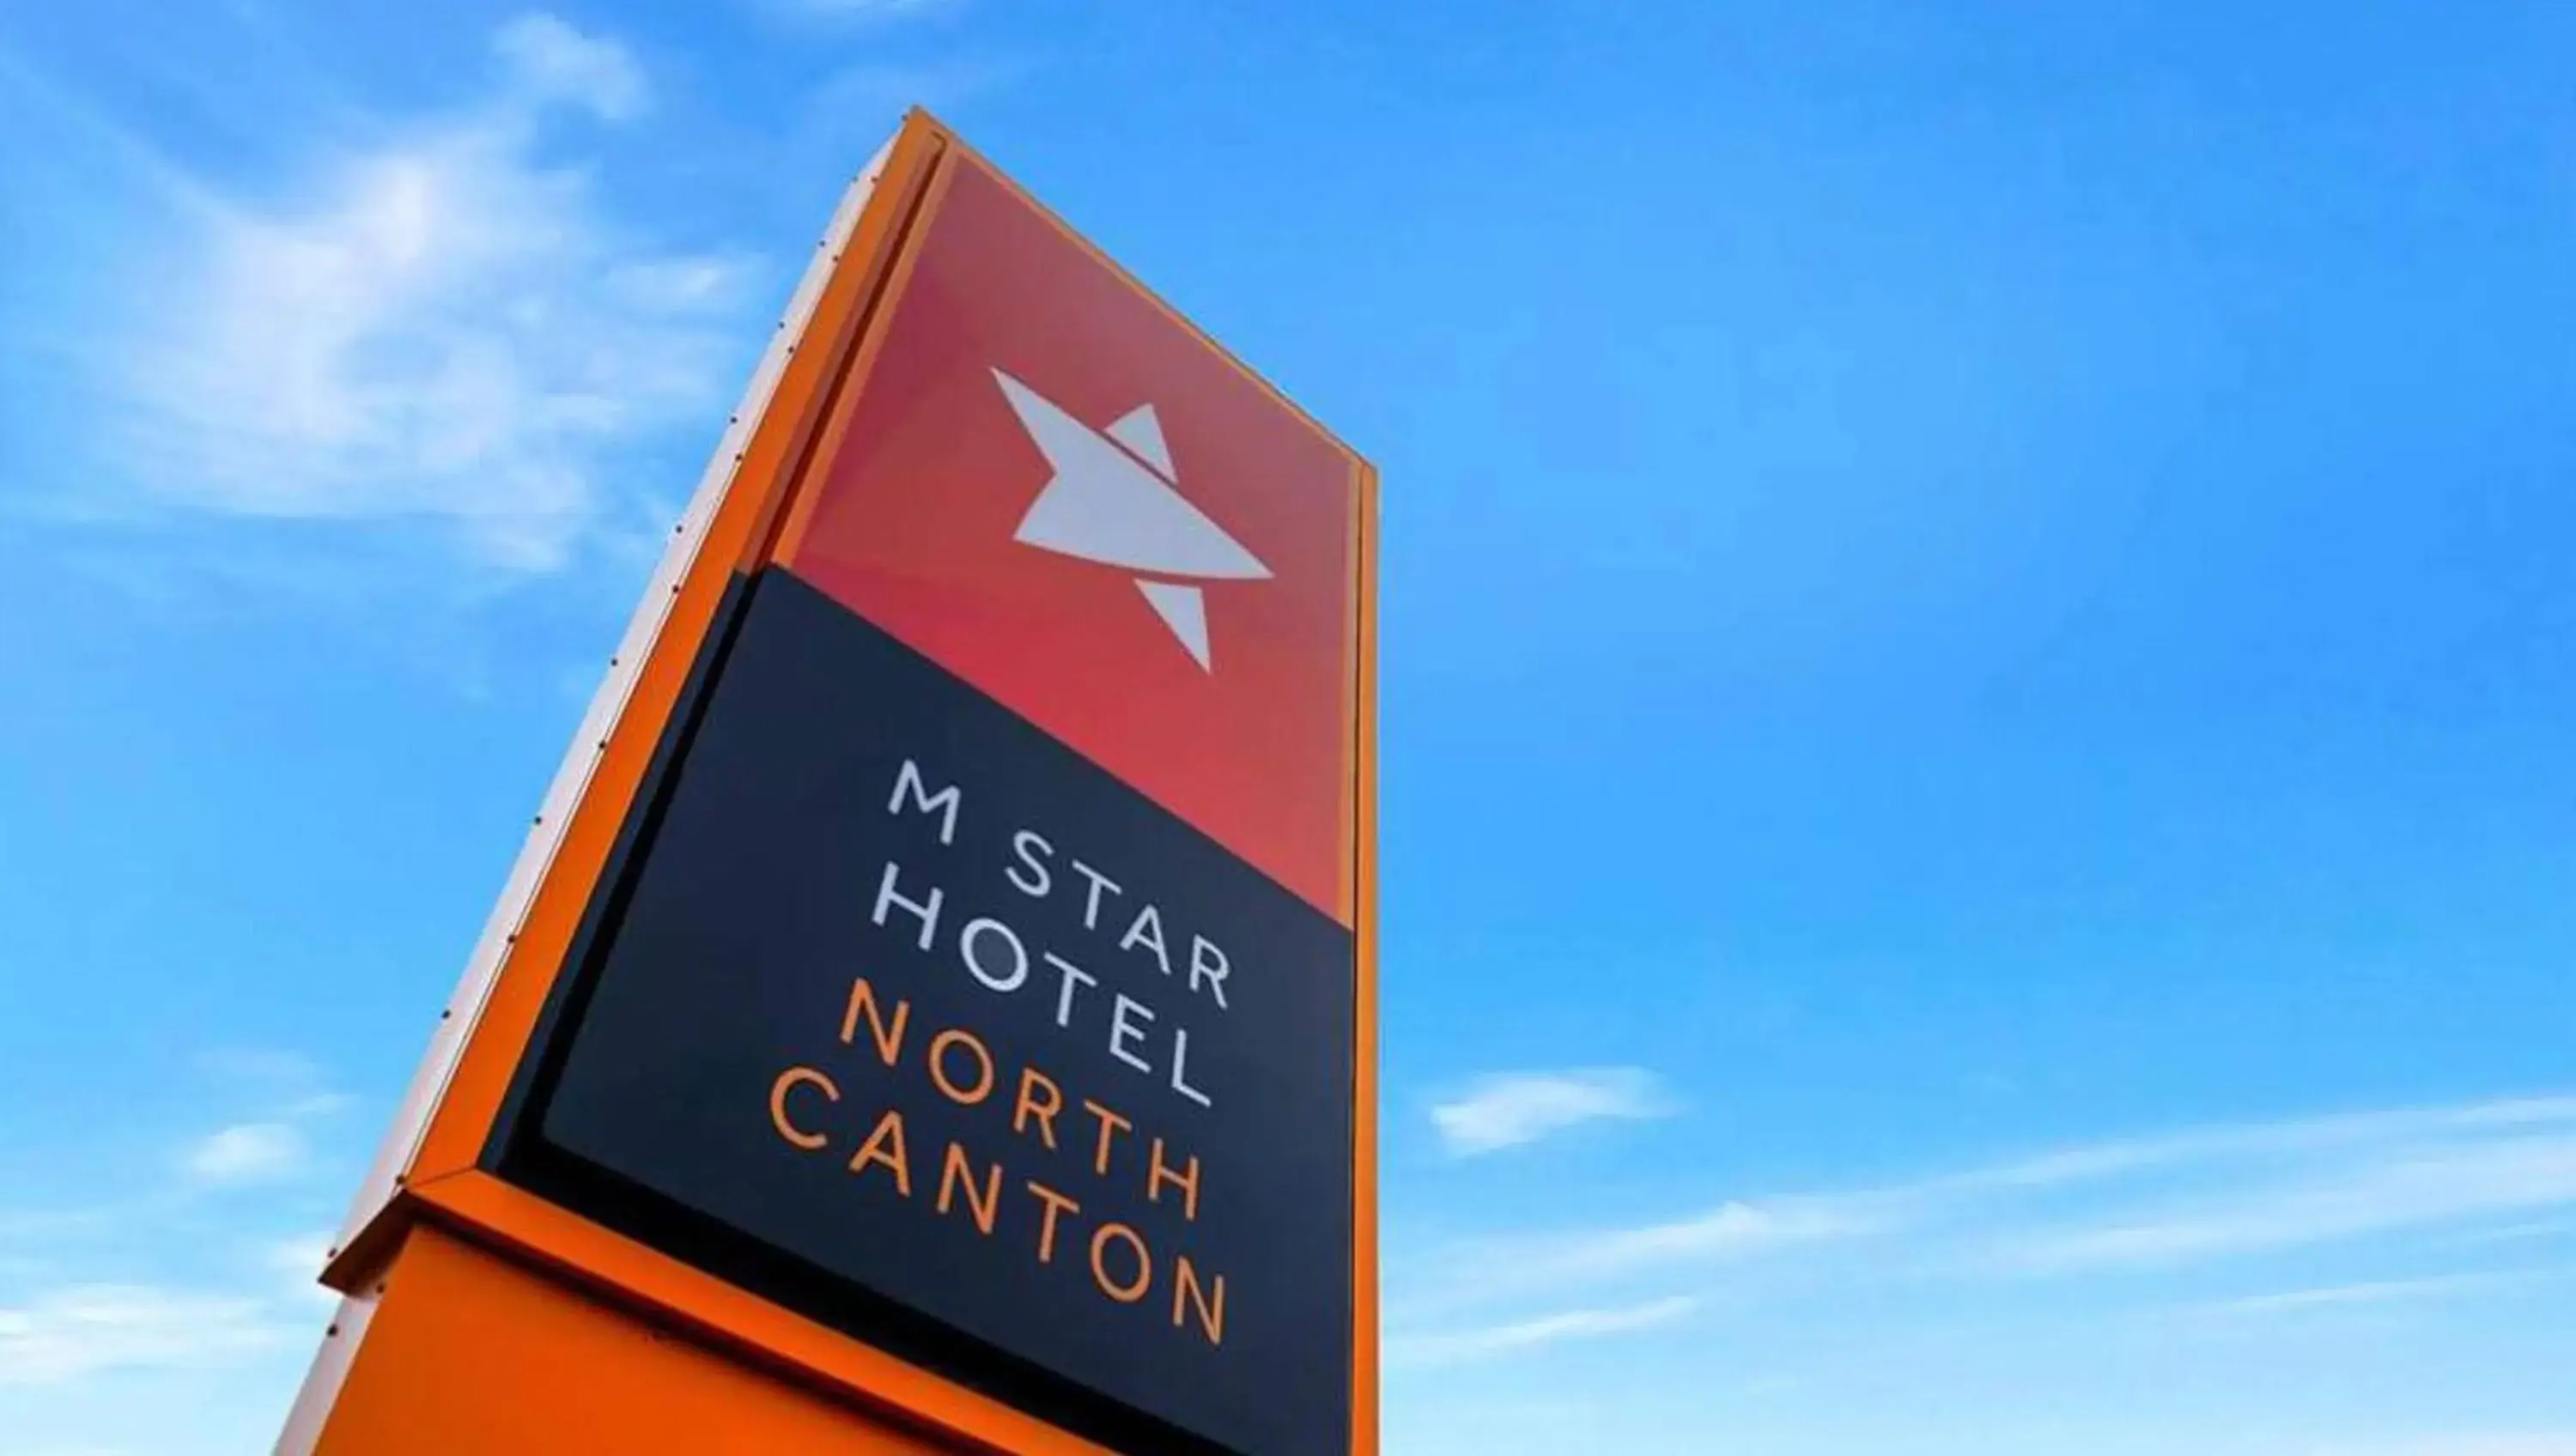 Property building in M Star North Canton